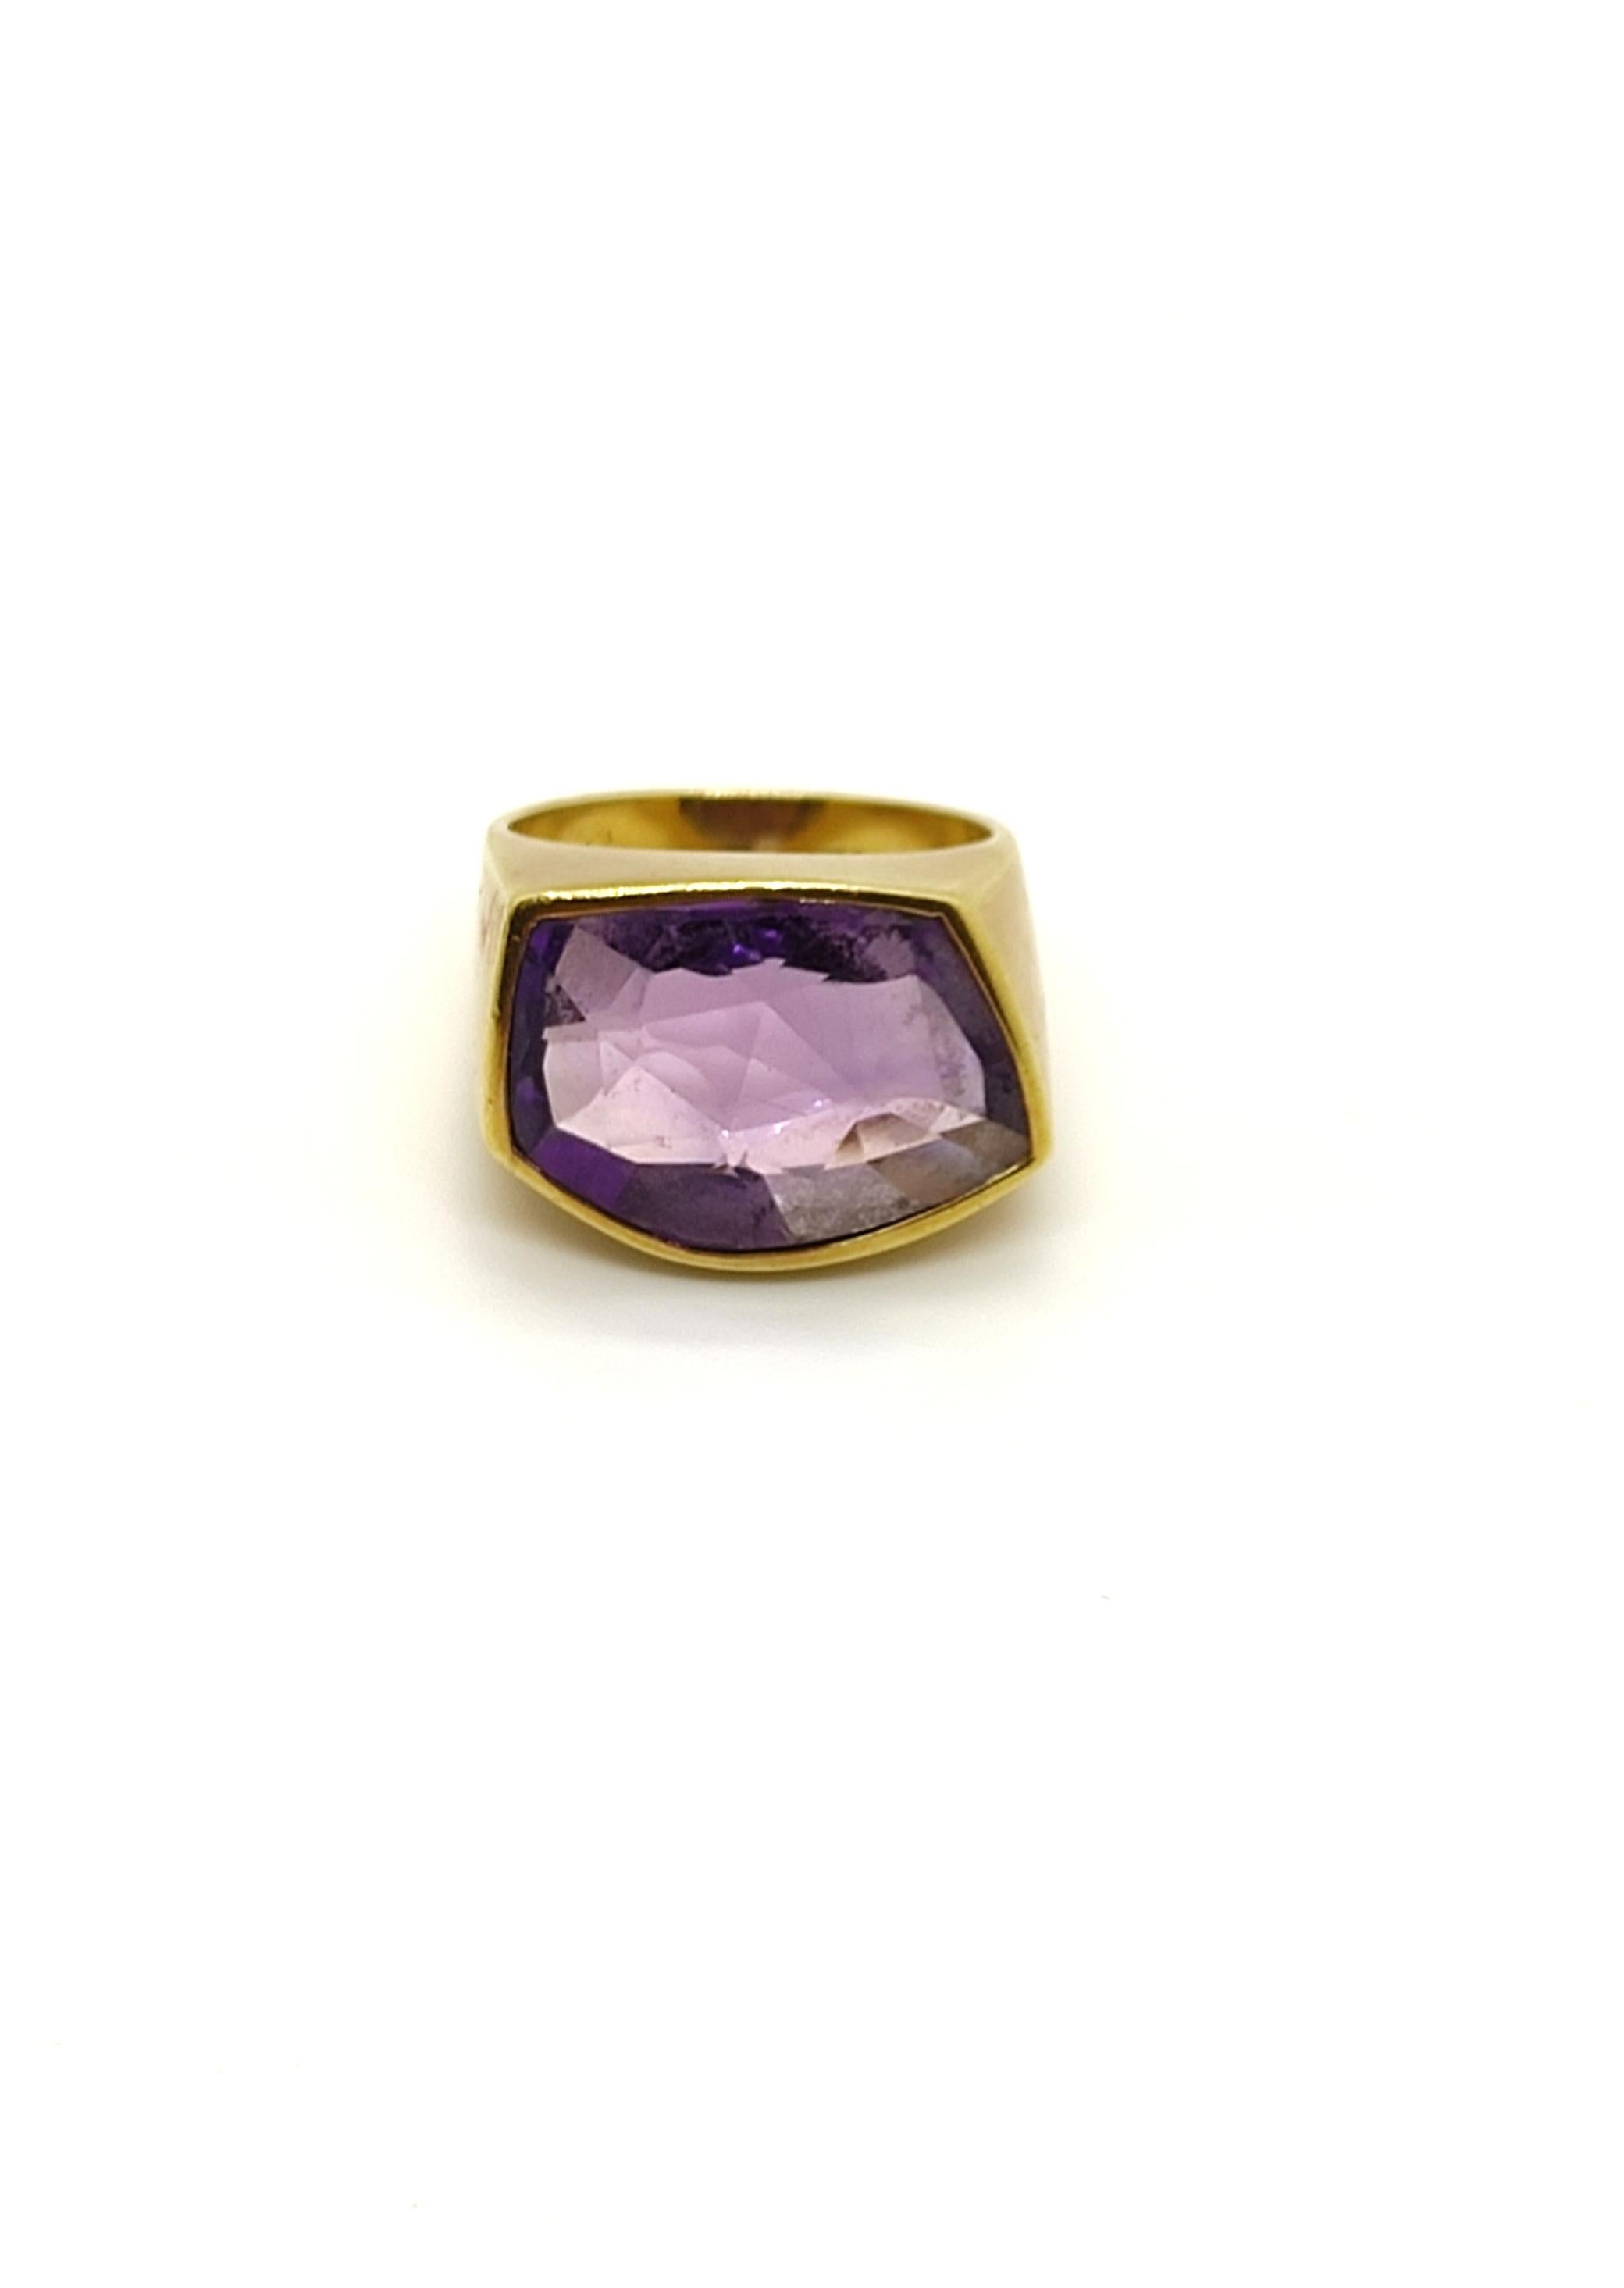 This modern asymmetrical ring crafted in 18k yellow gold, is decorated with an awesome asymmetric amethyst gem stone, embedded in the ring. This beautiful and original ring will complete any outfit and will be suitable for any occasion.

This ring